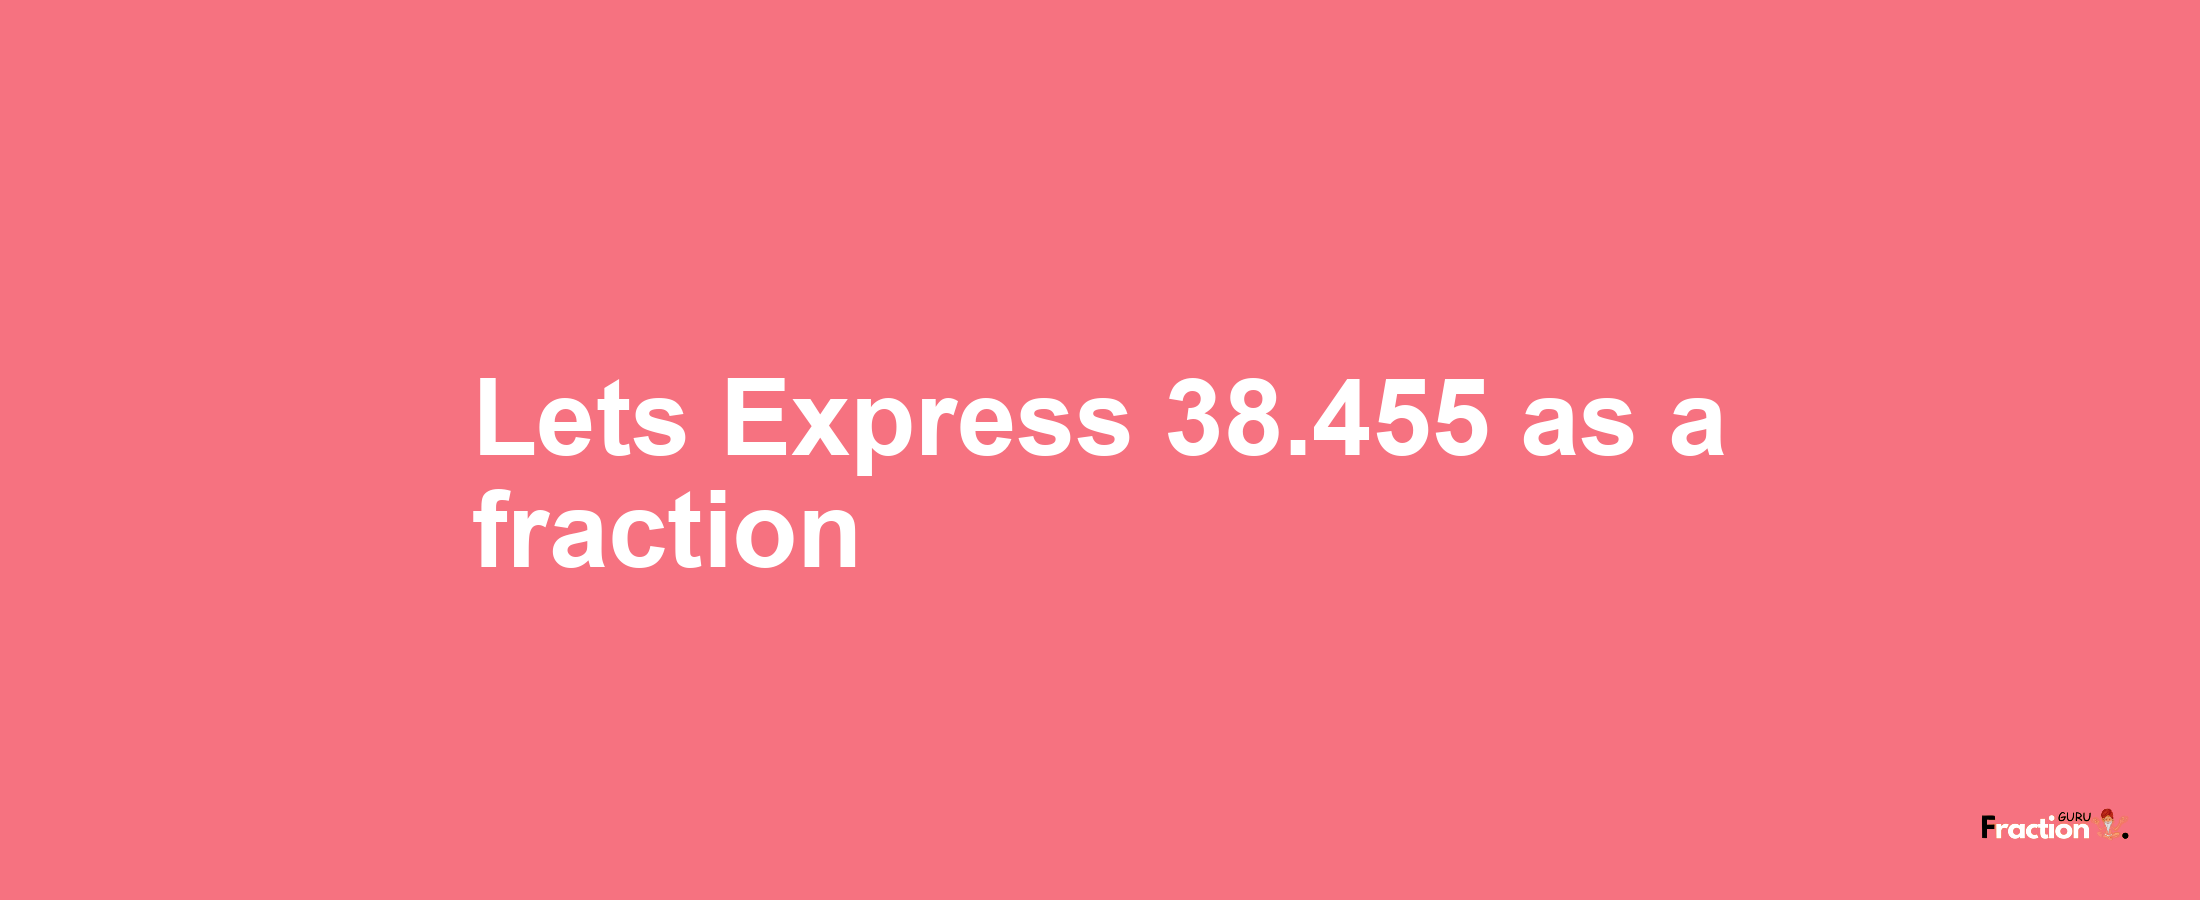 Lets Express 38.455 as afraction